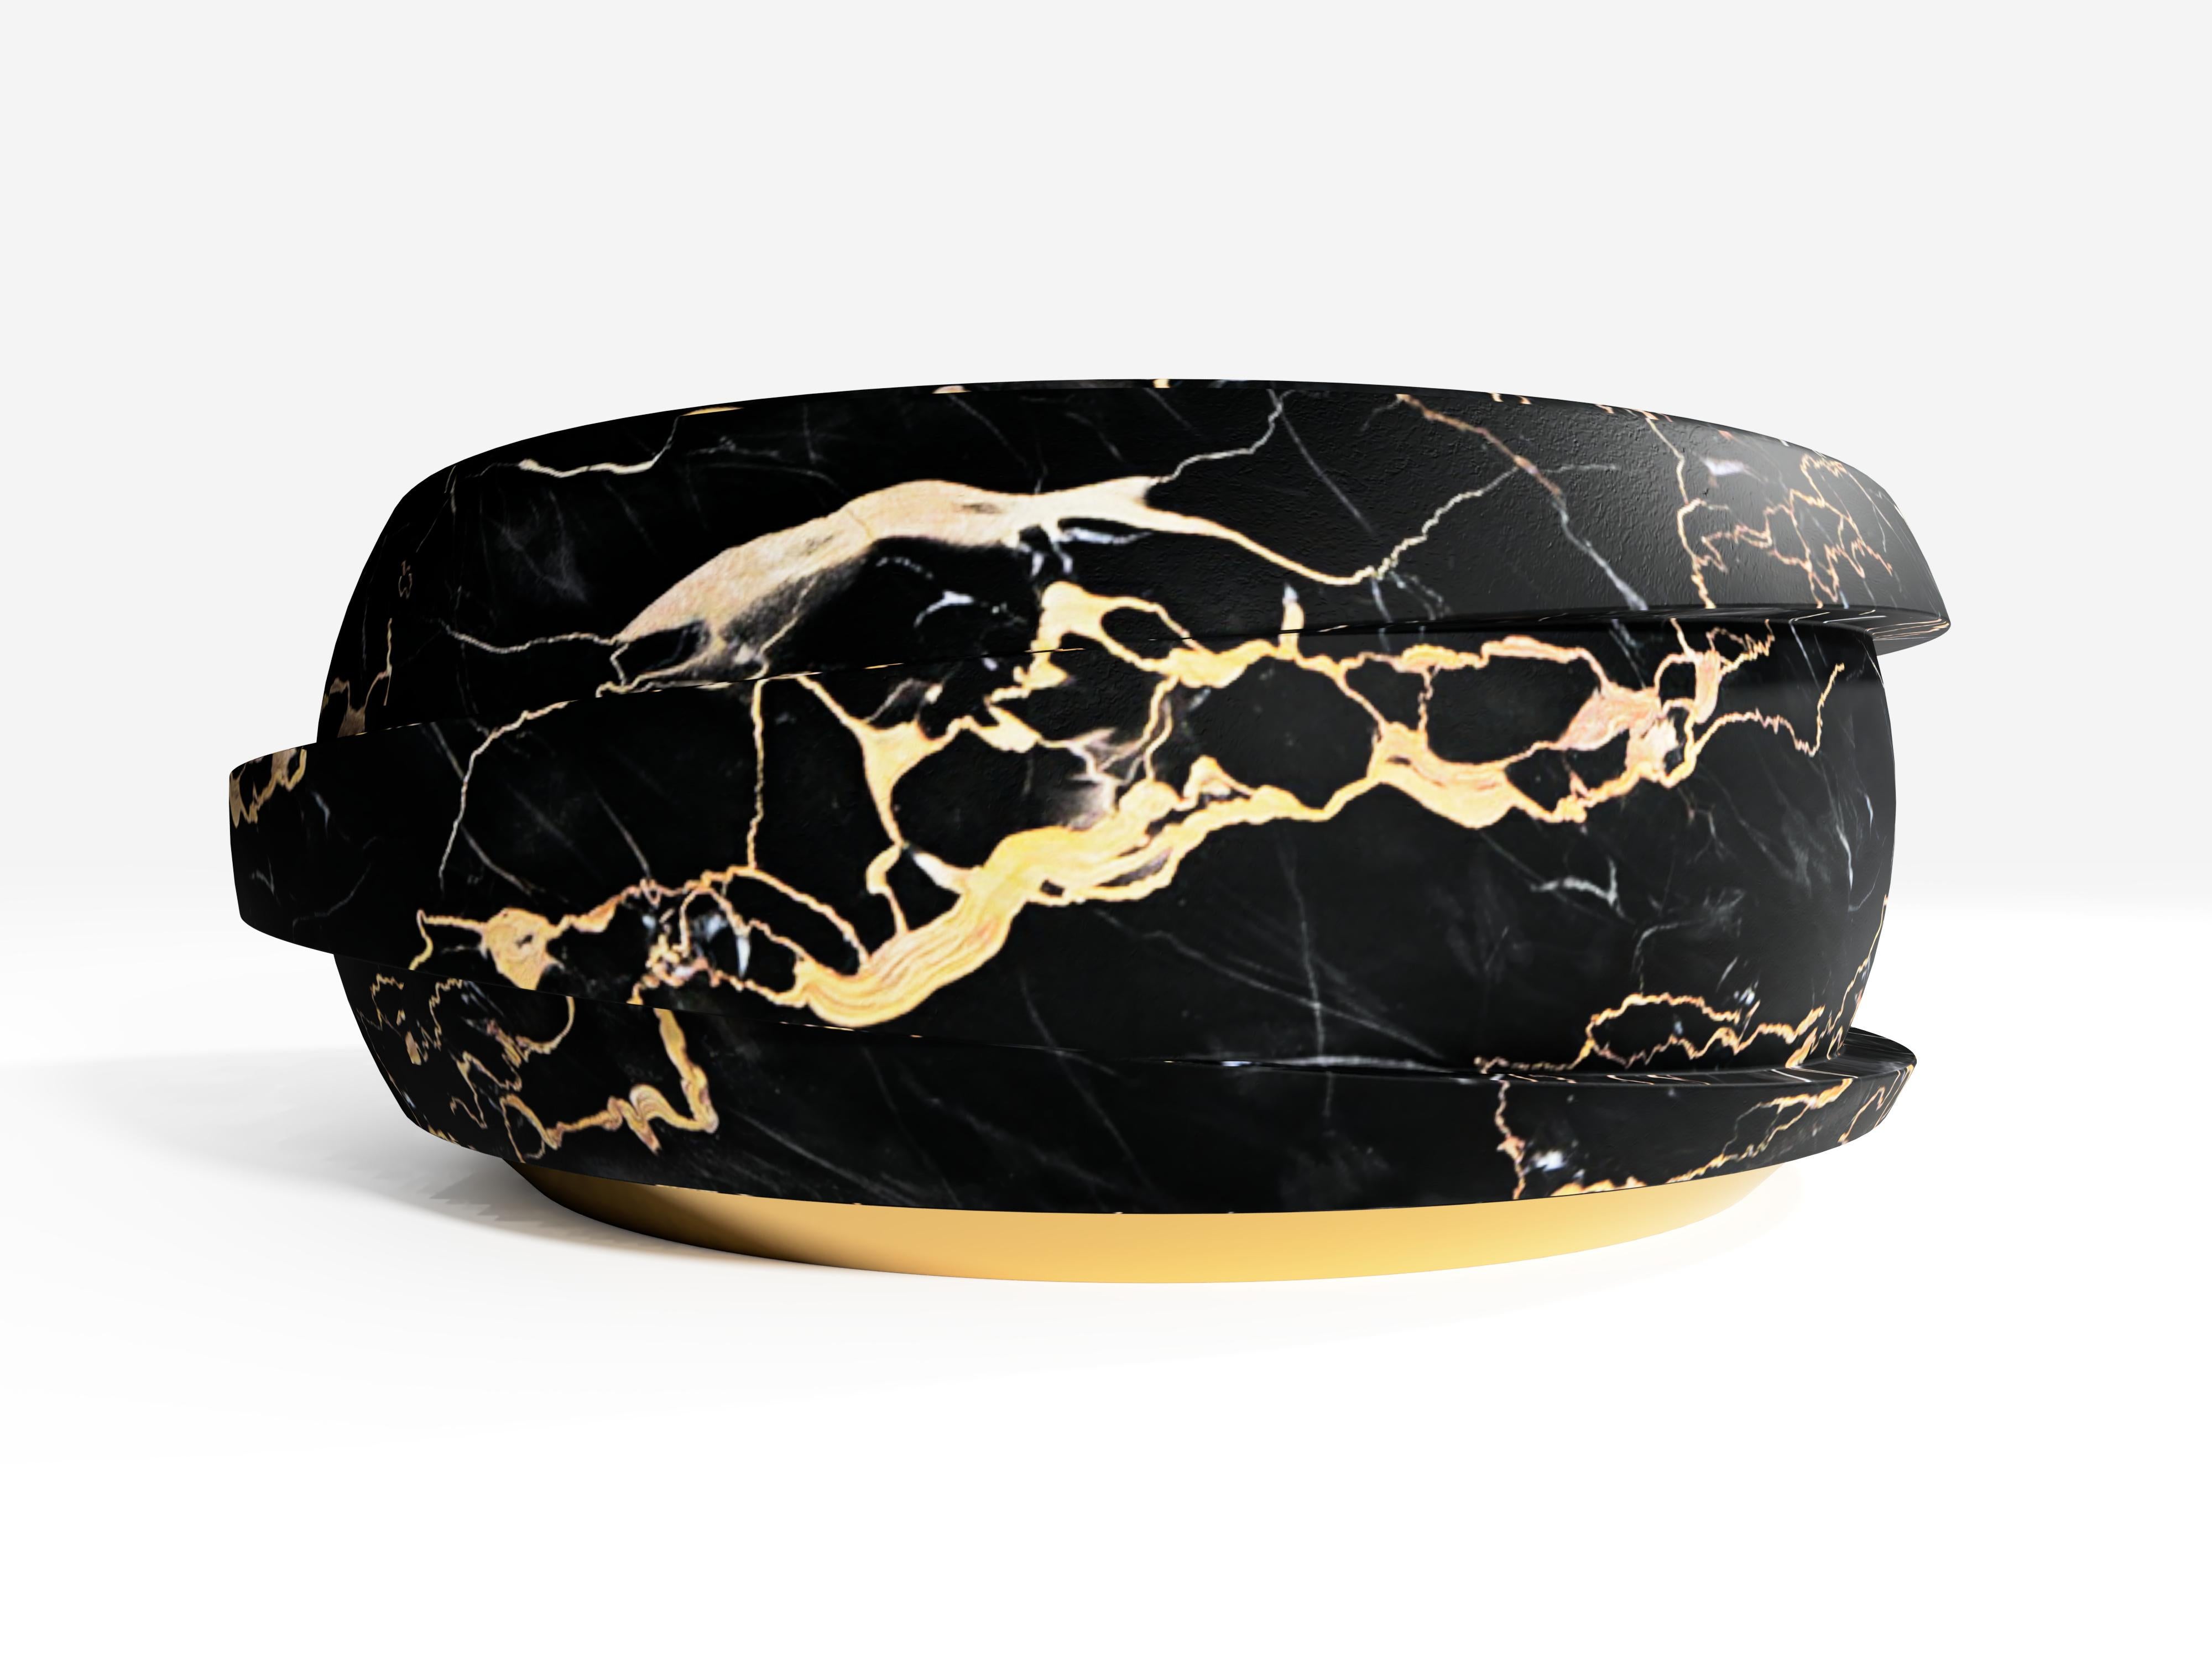 Infinity elegant, prestige and full of mysteries washbasin. An unusual shape of the washbasin represents the shape of infinity hidden in the visual design of the art piece. The Infinity is made of one of the most luxurious marble Nero Portoro, which